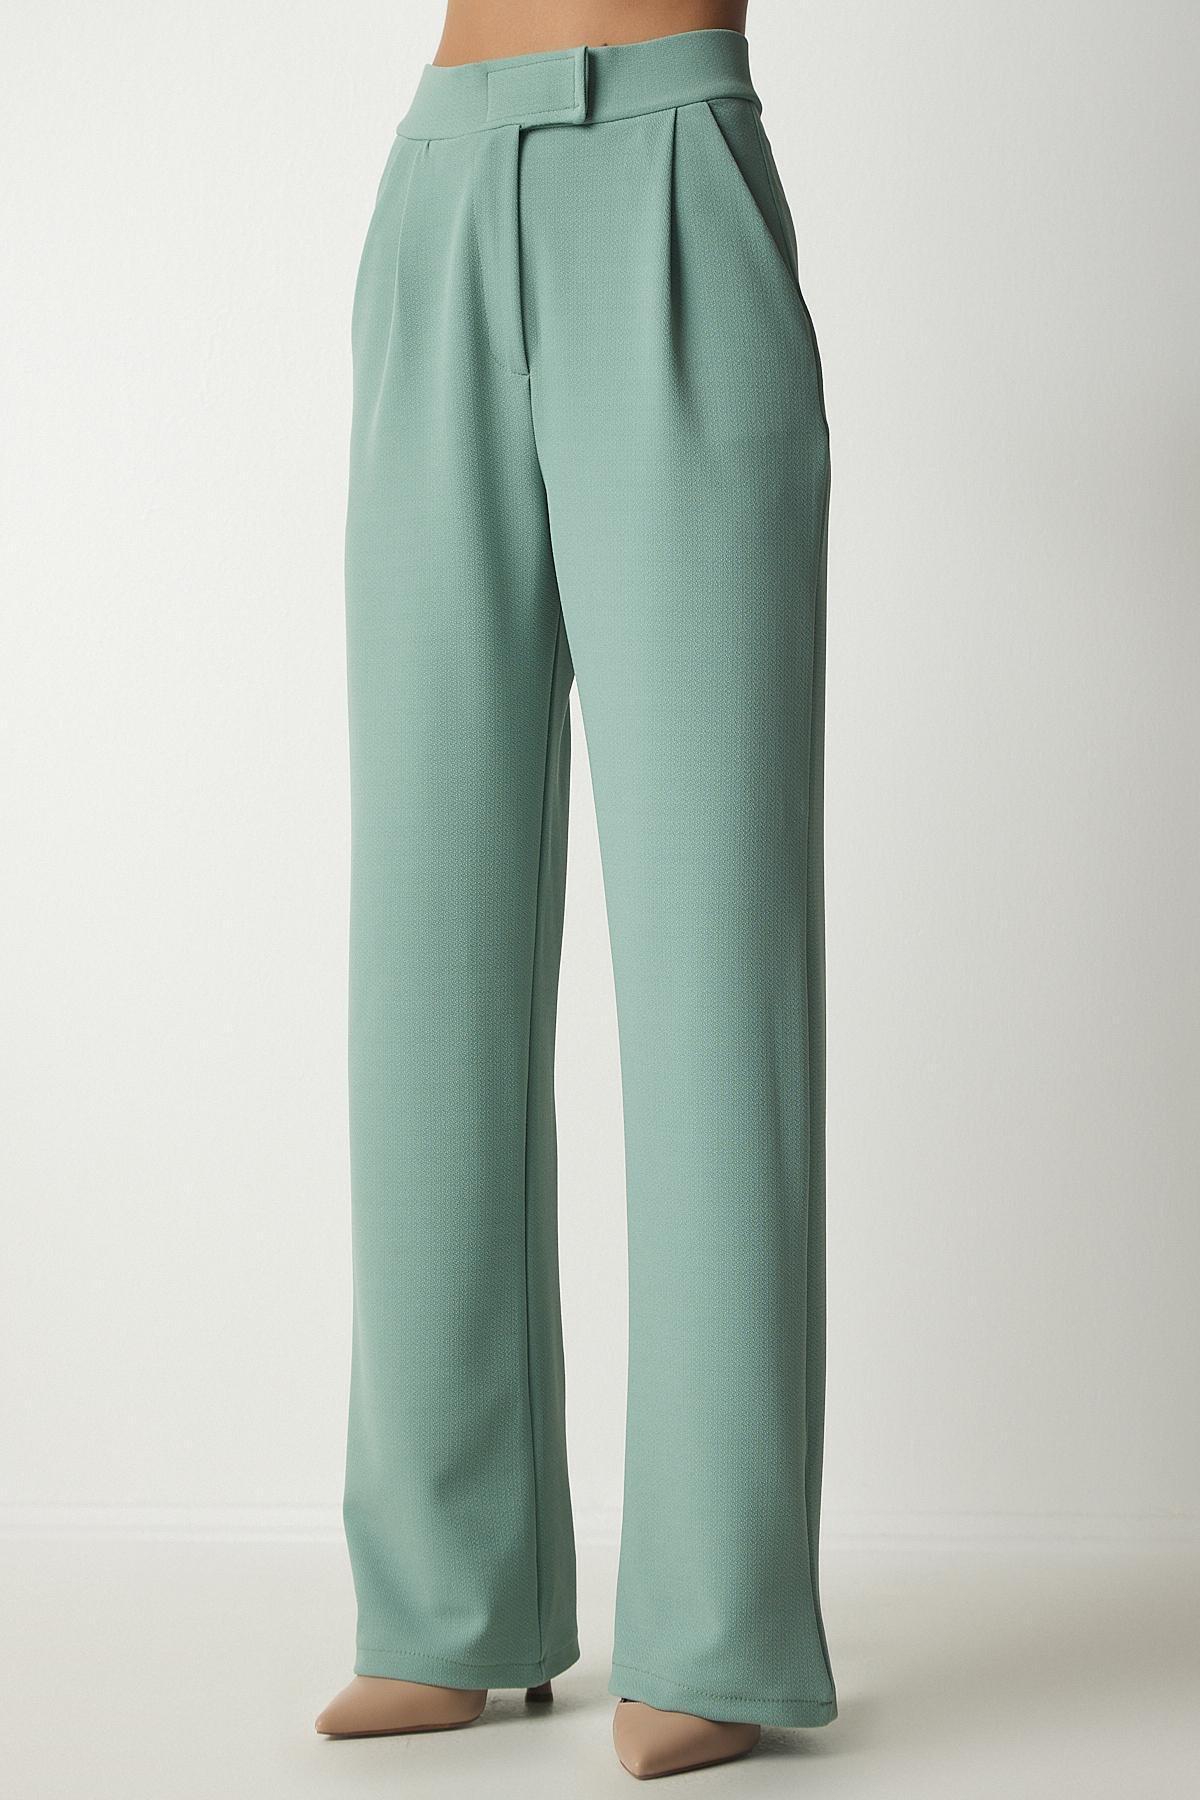 Happiness Istanbul - Green Comfortable Woven Trousers With A Waist